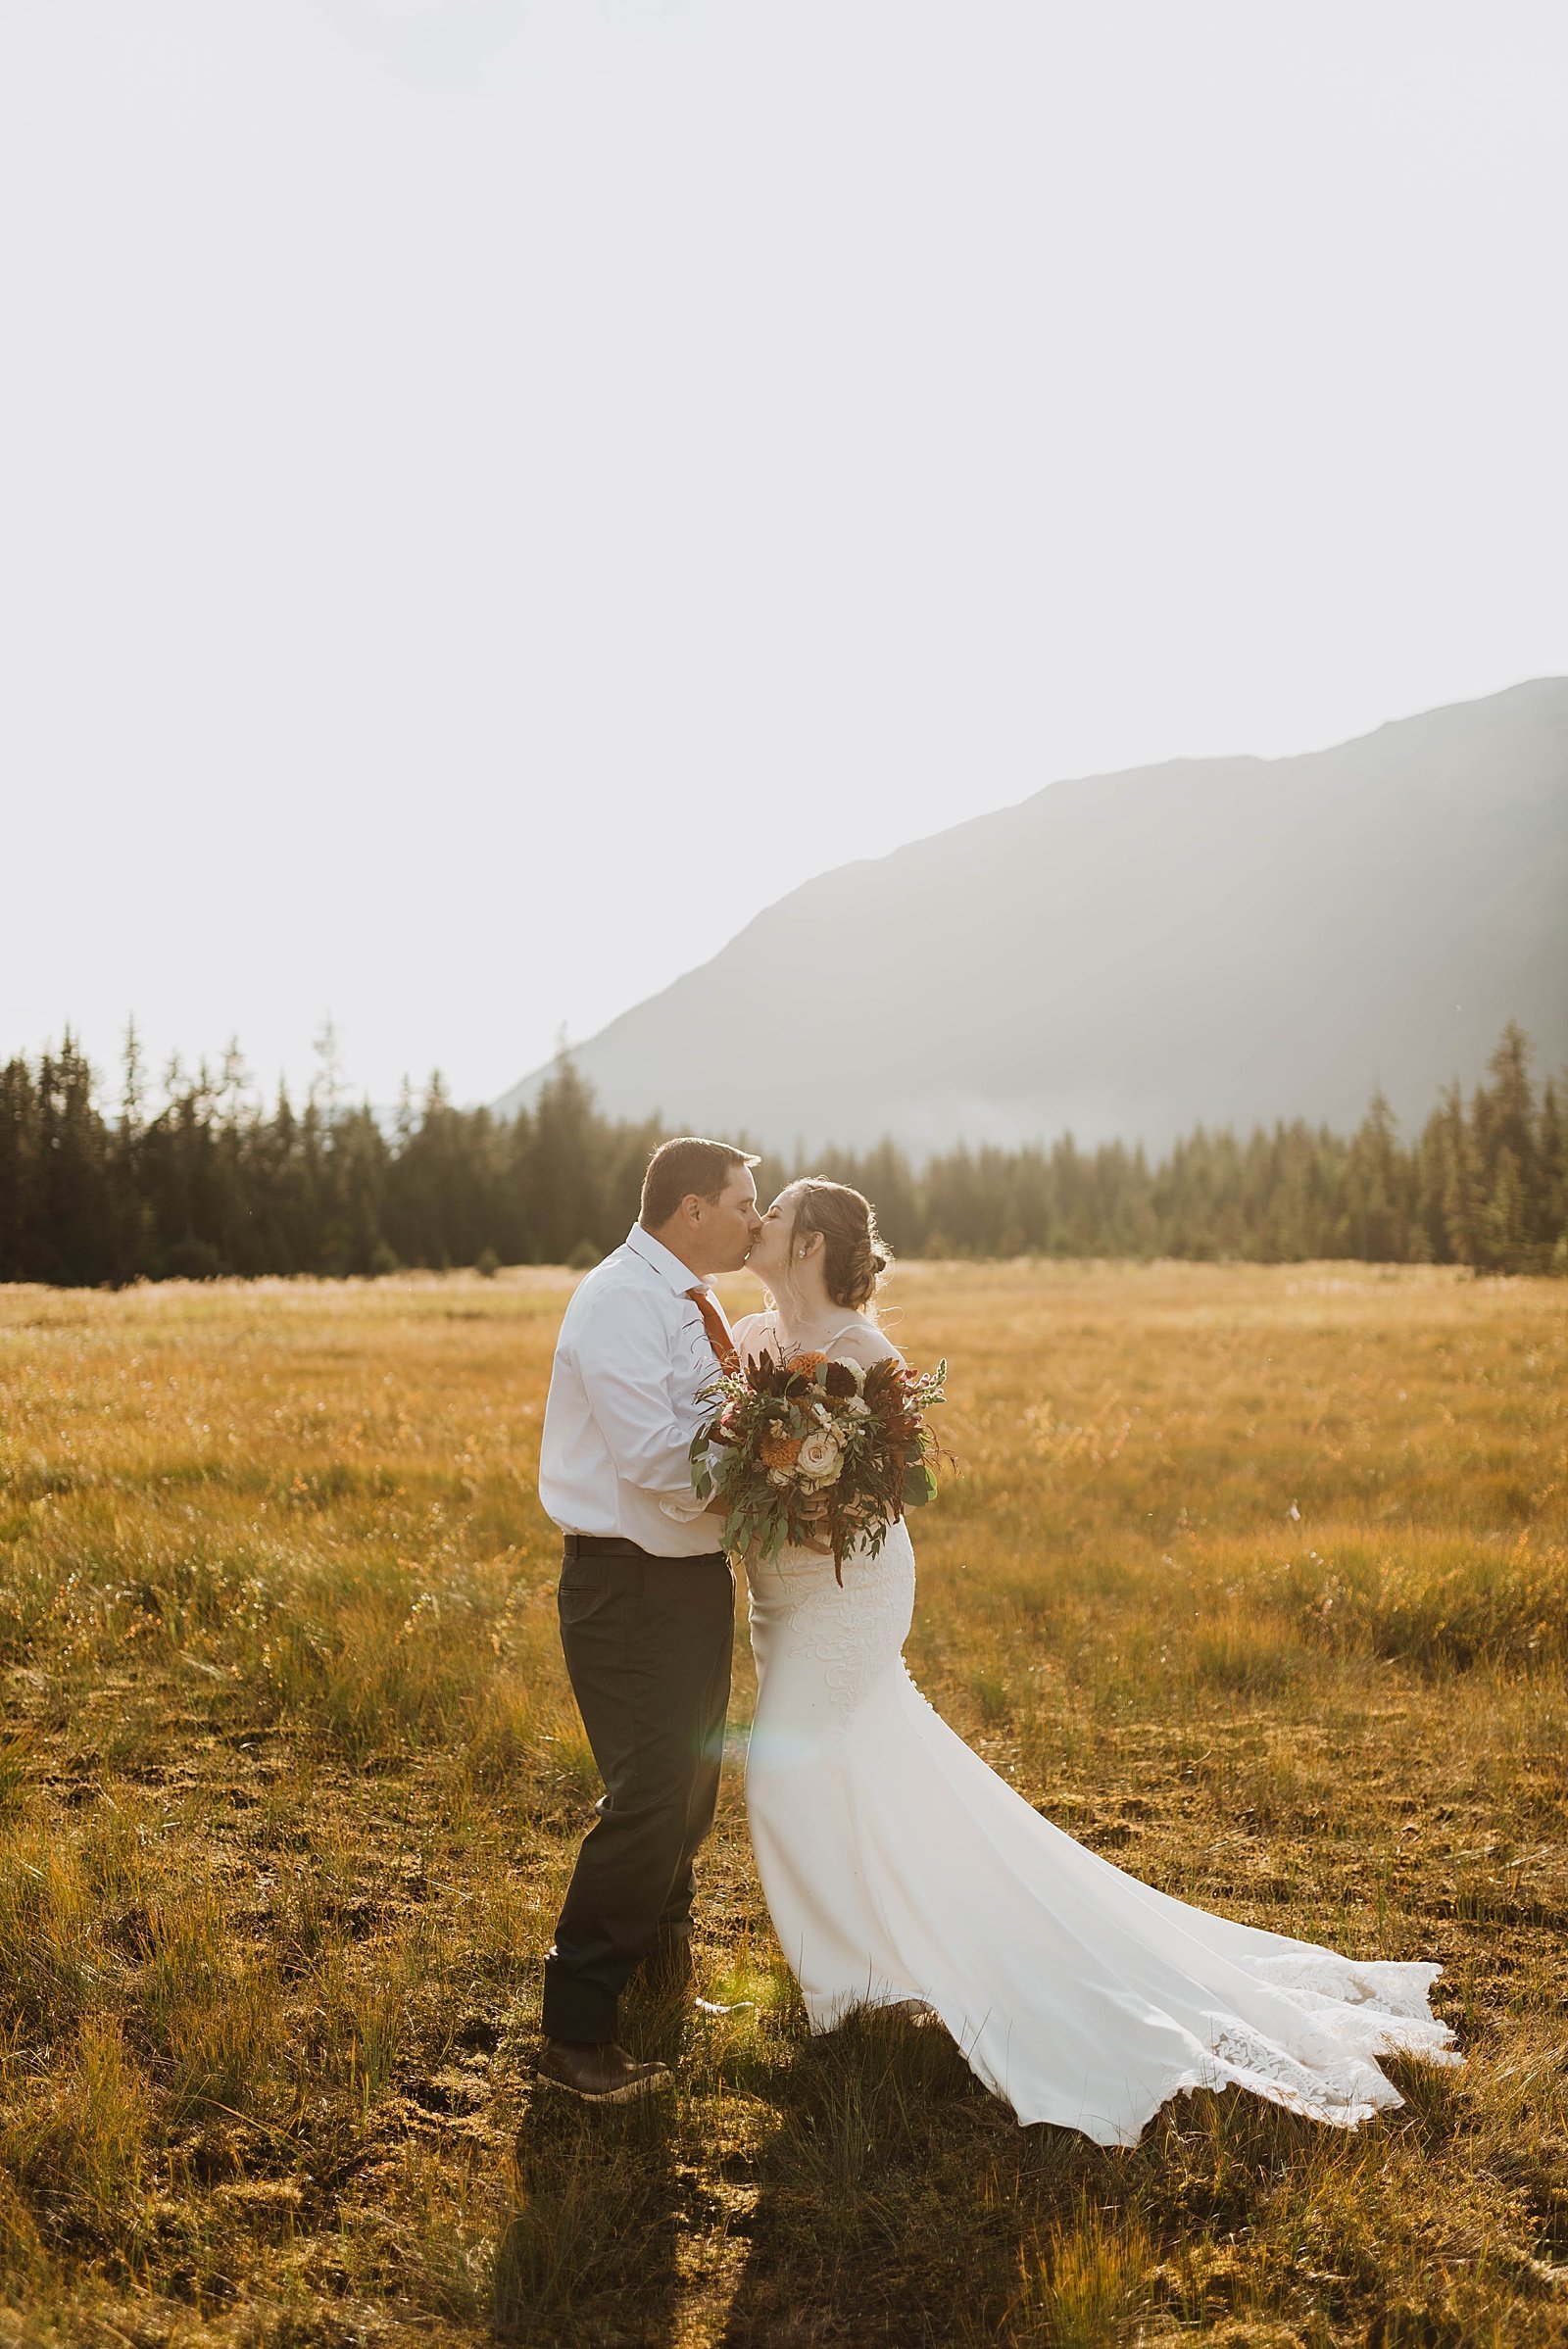  Newlyweds embracing in a field with Girdwood mountains behind them 